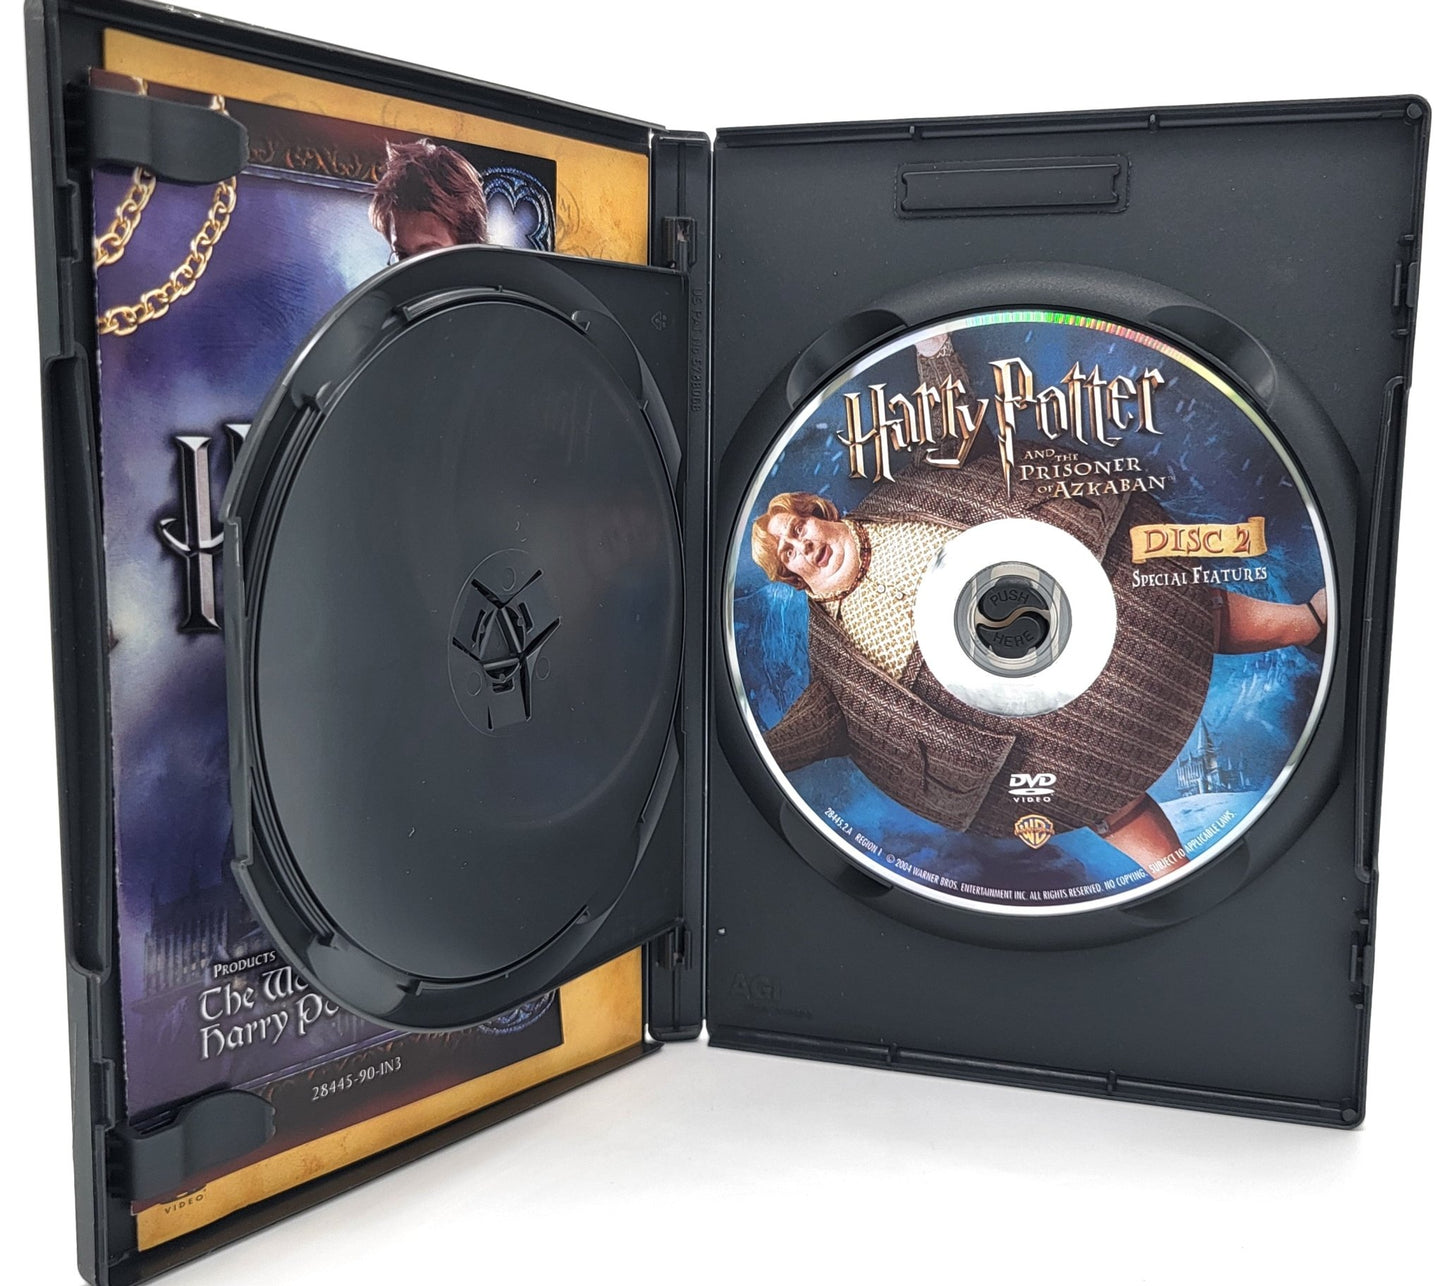 Warner Brothers - Harry Potter and The Prisoner of Azkaban | DVD | 2 Disc Widescreen Edition - DVD - Steady Bunny Shop